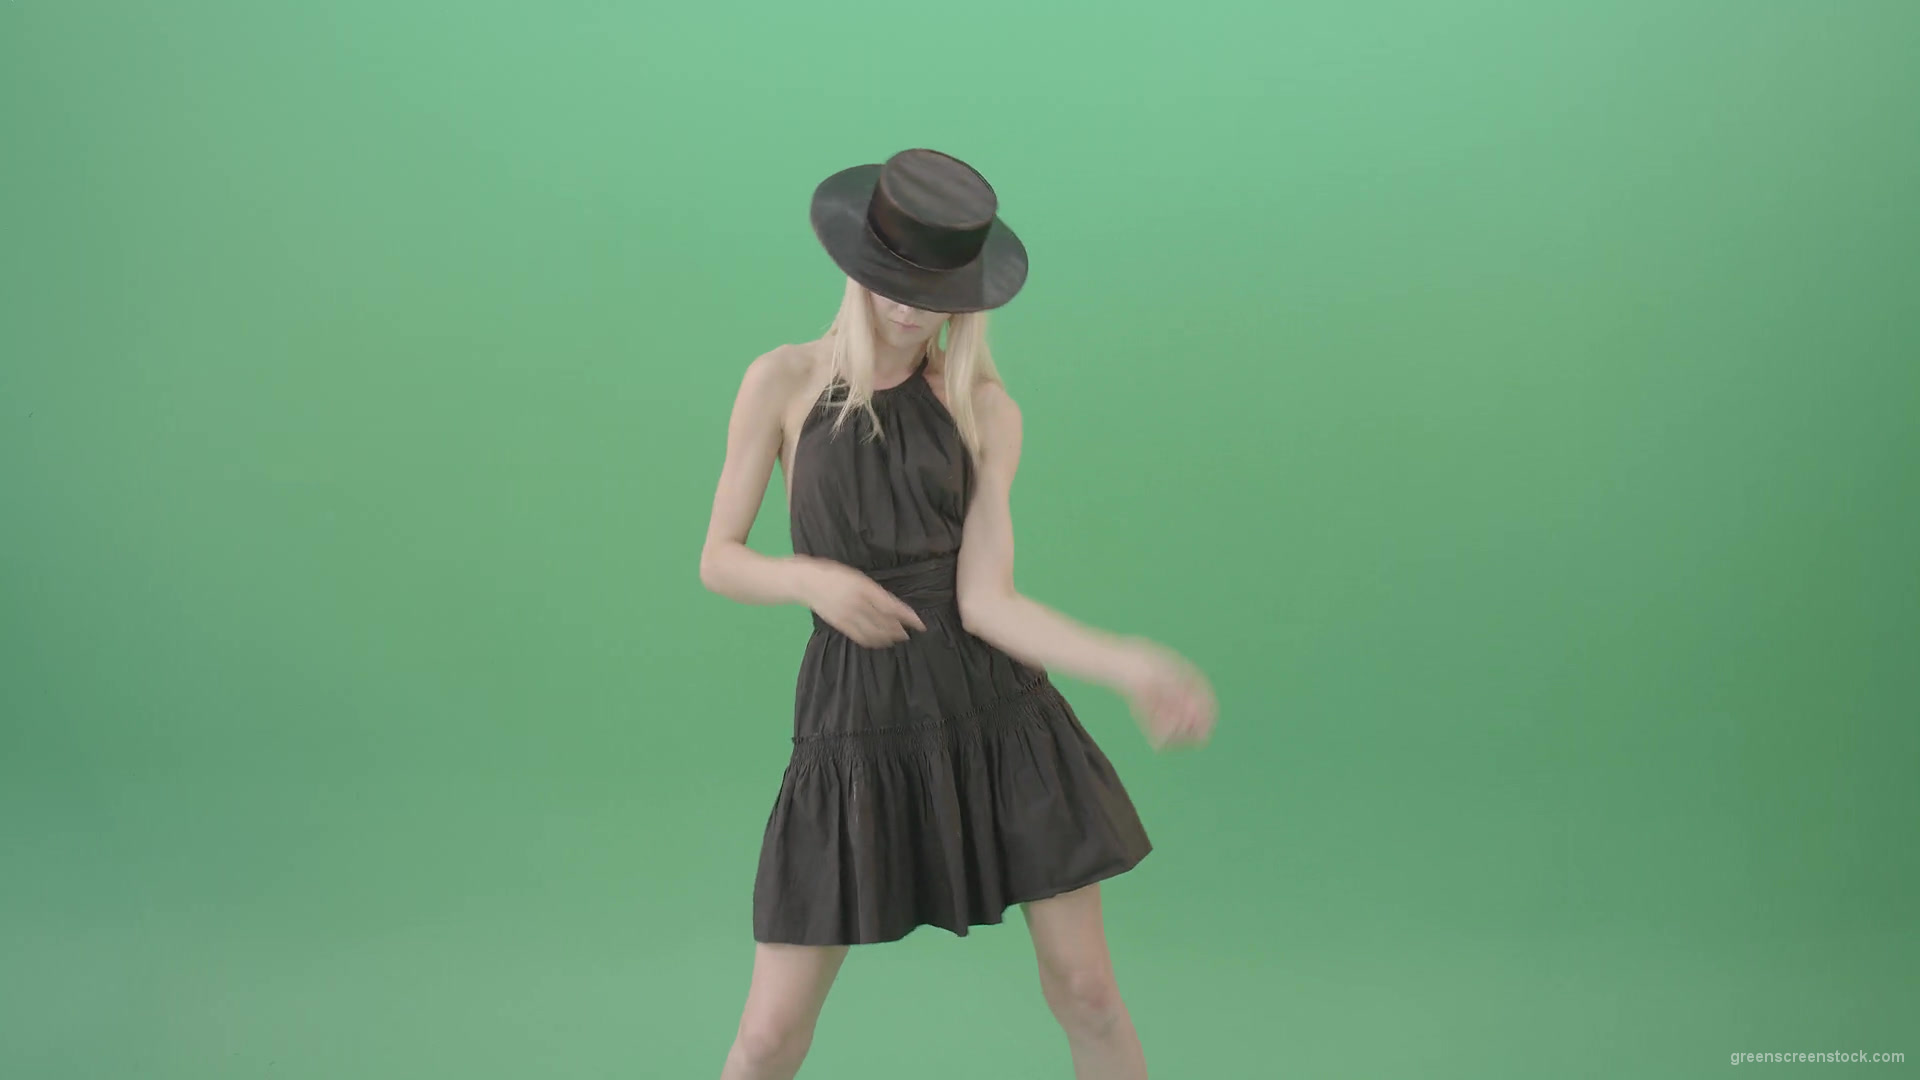 Video-Art-Fashion-Dance-by-Girl-in-black-outlet-and-dark-hat-on-green-screen-Video-Footage-1920_008 Green Screen Stock